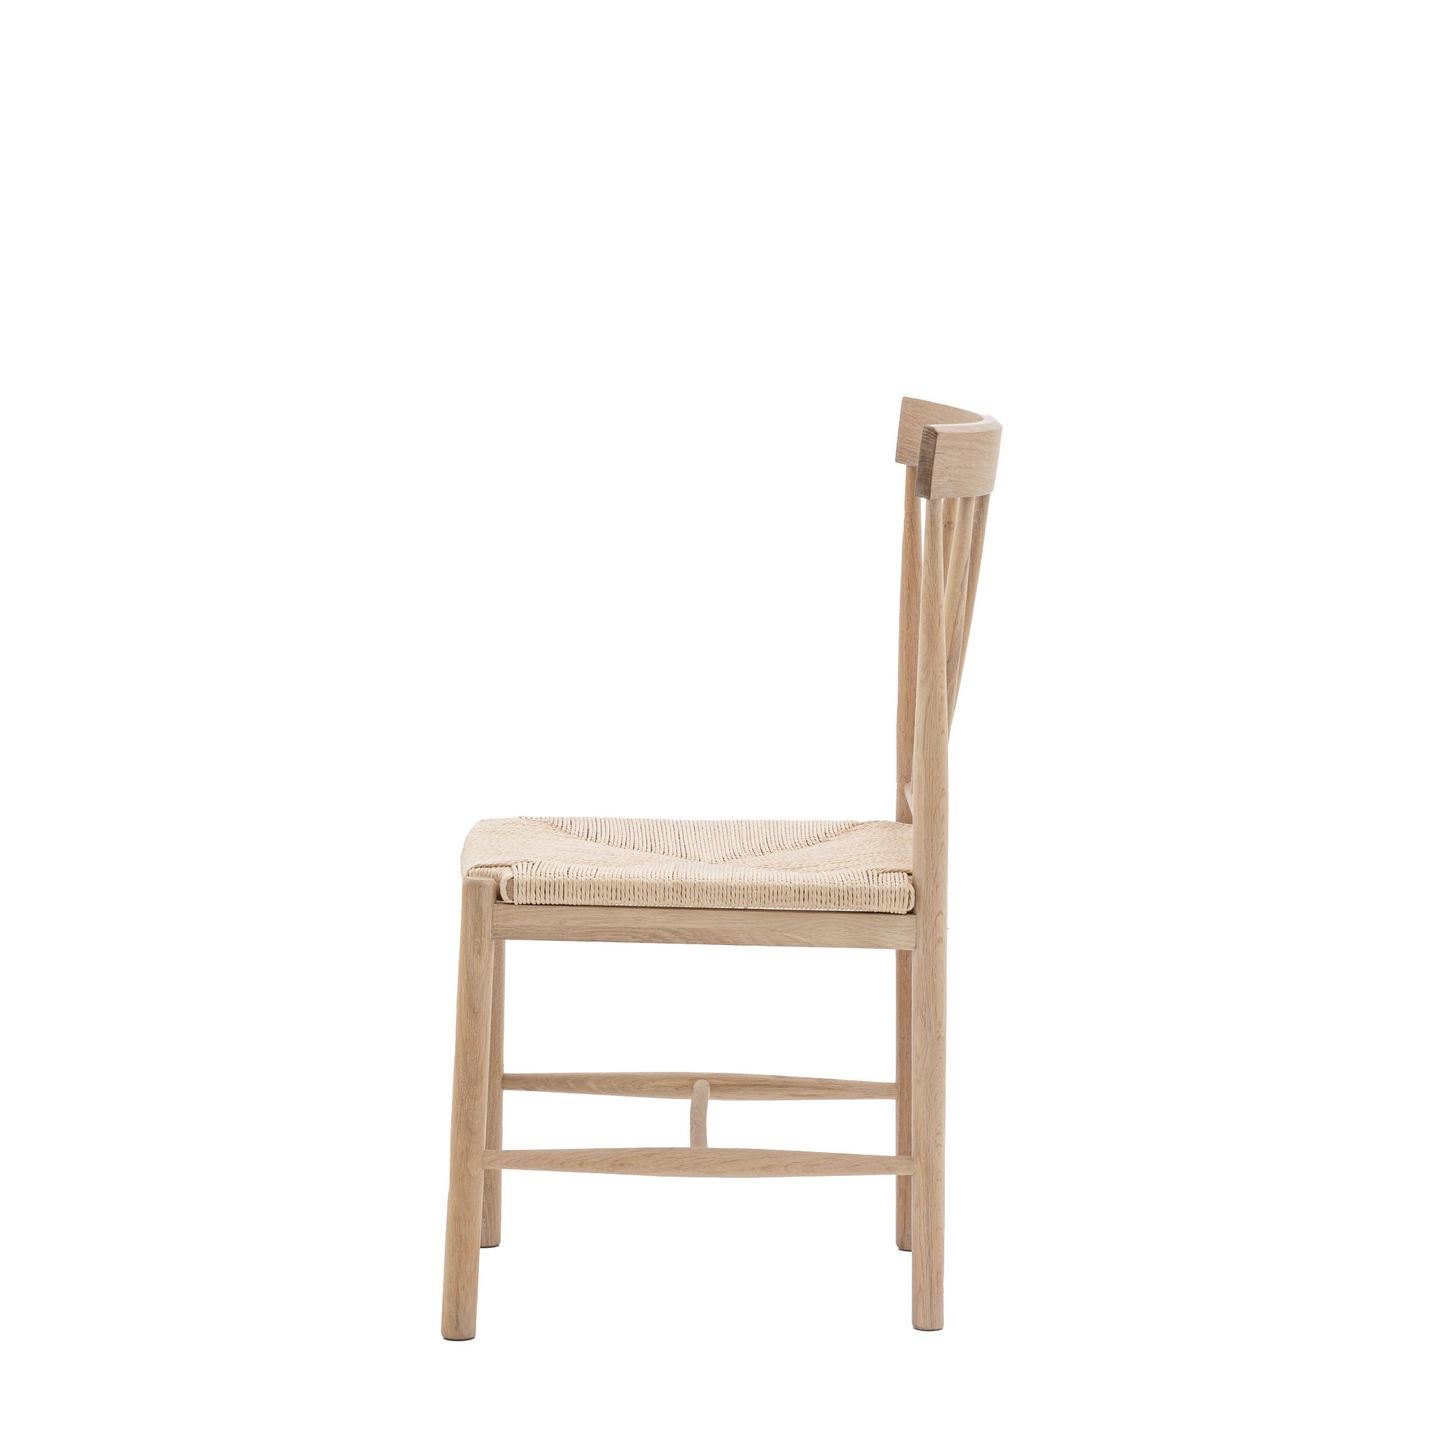 Interior decor, Home furniture: A Buckland Dining Chair 2pk Oak by Kikiathome.co.uk is showcased on a white background.